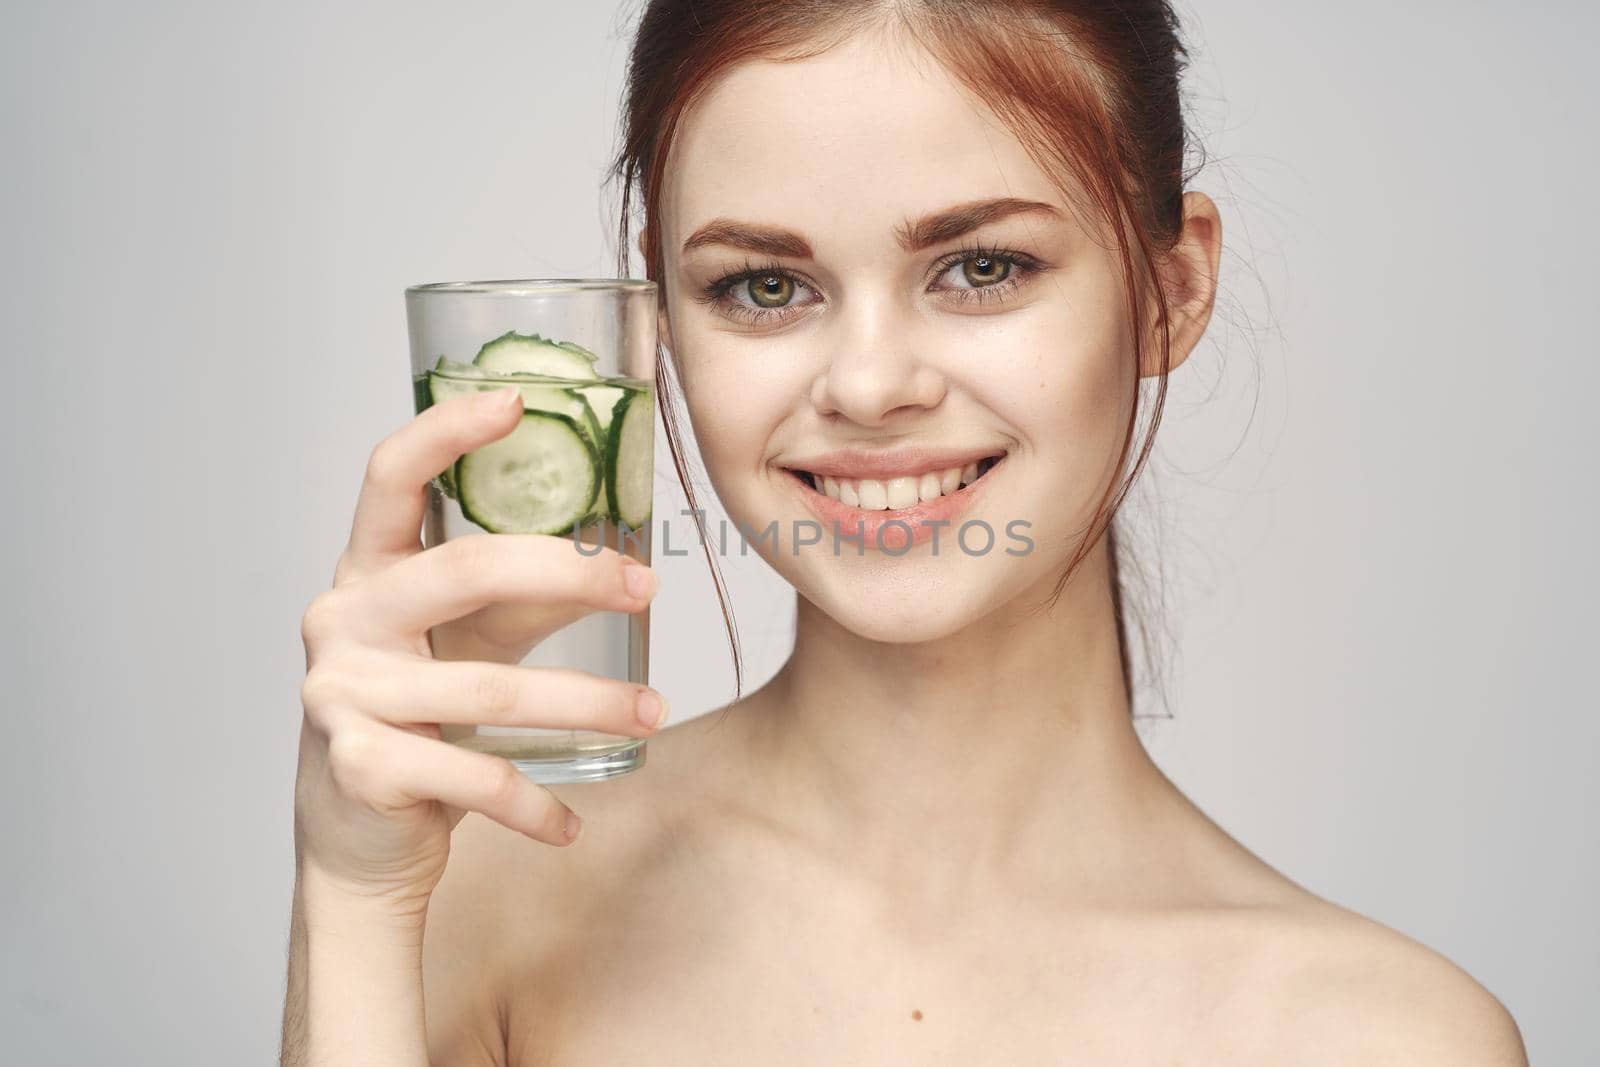 woman with bare shoulders cucumber health drink Fresh by Vichizh